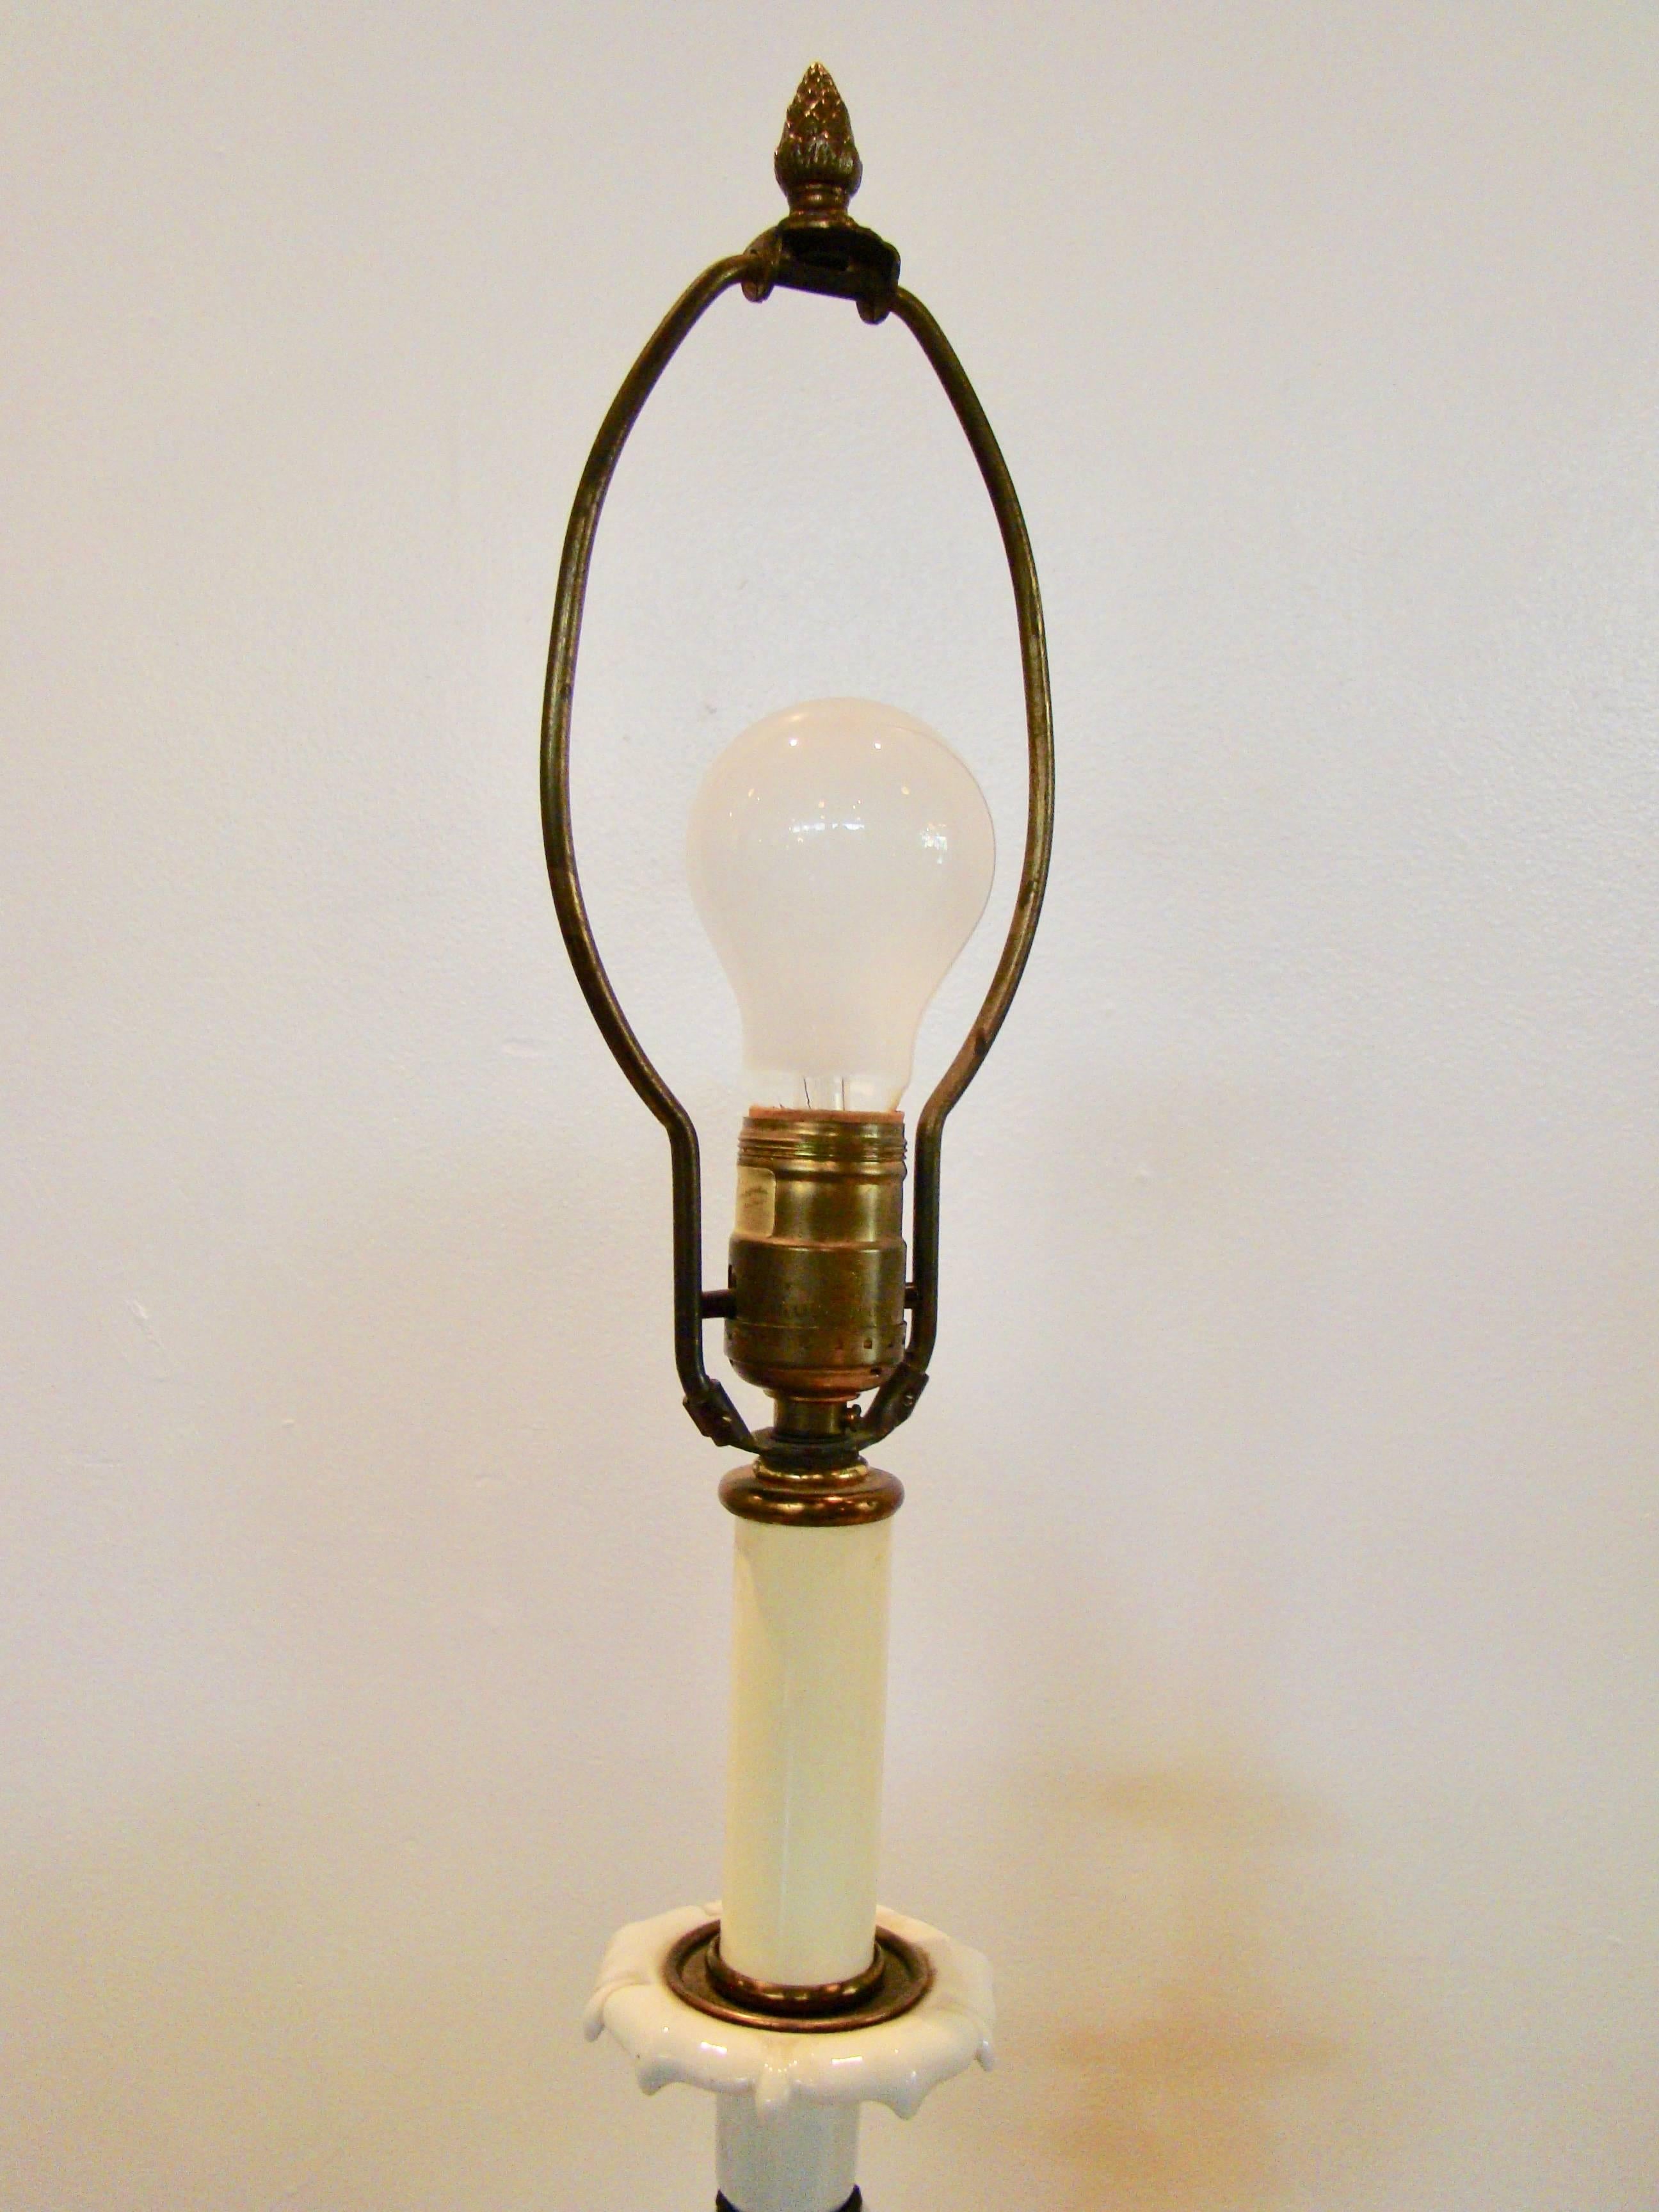 White Porcelain Figural Table Lamp with Brass Trim by Paul Hanson In Excellent Condition For Sale In Denver, CO